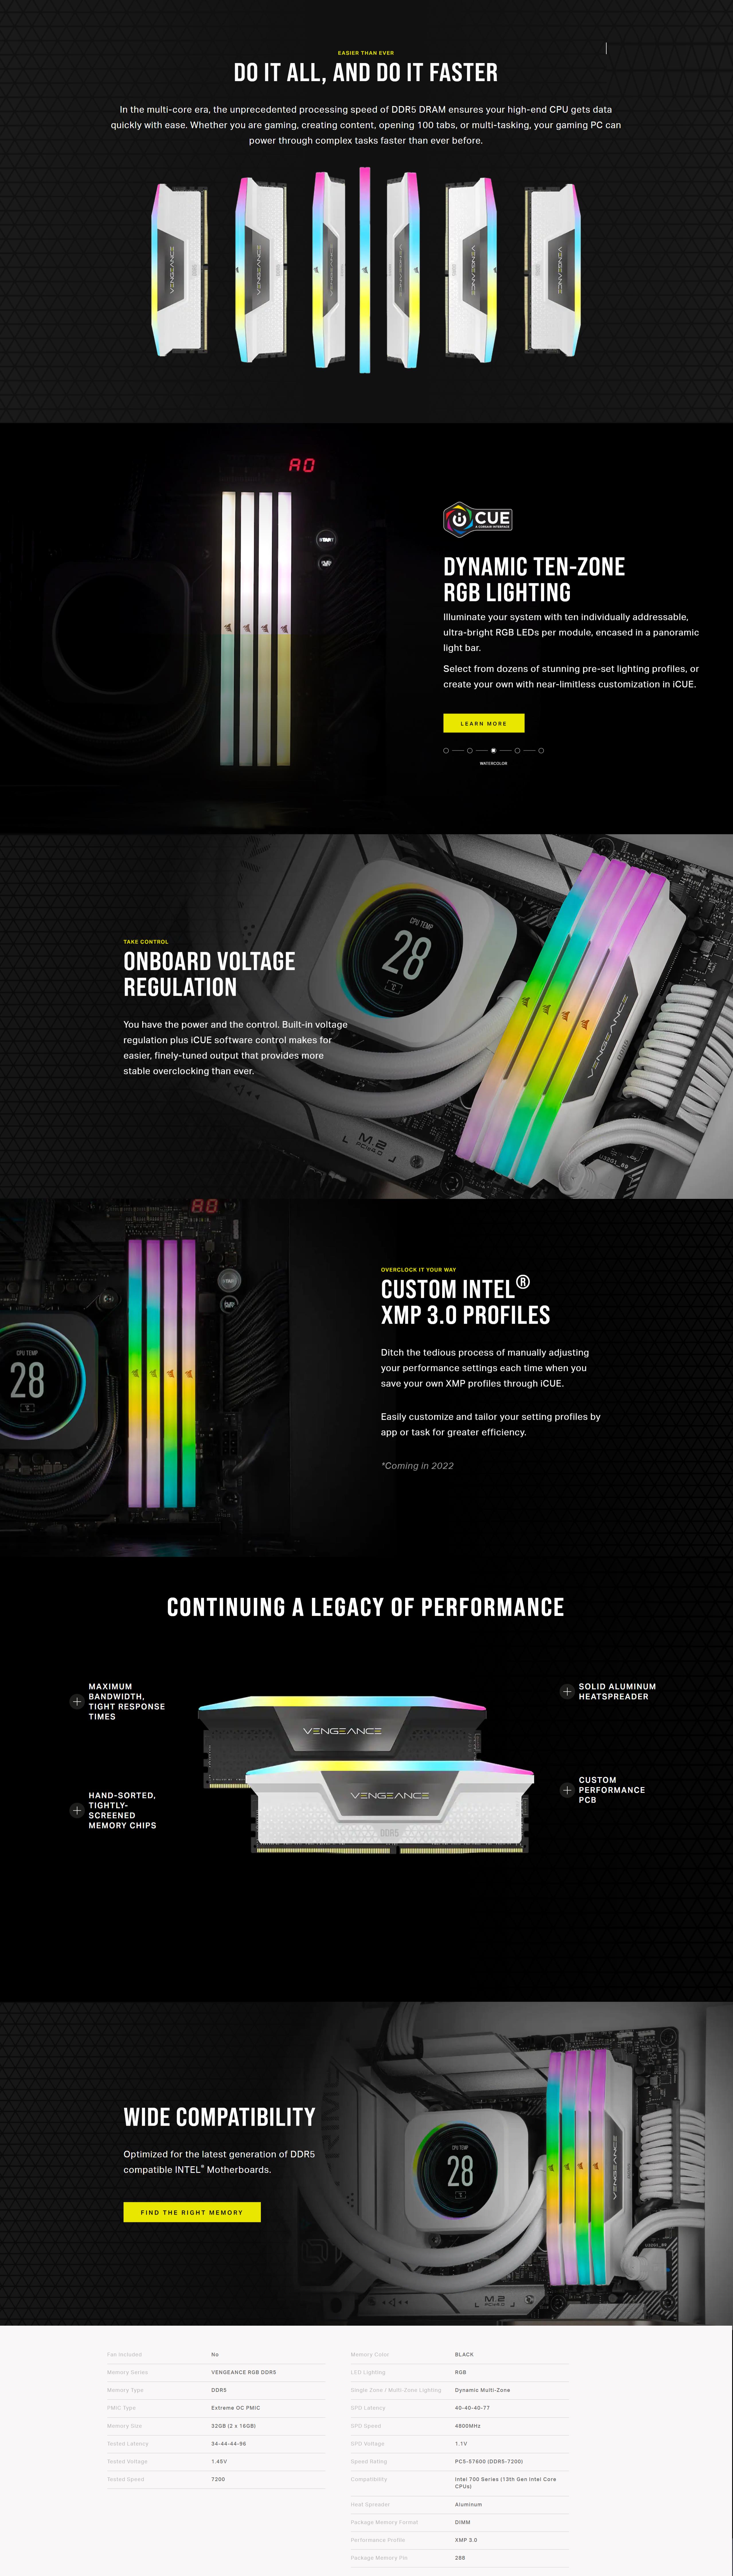 A large marketing image providing additional information about the product Corsair 32GB Kit (2x16GB) DDR5 Vengeance RGB C34 7200MT/s - Black - Additional alt info not provided